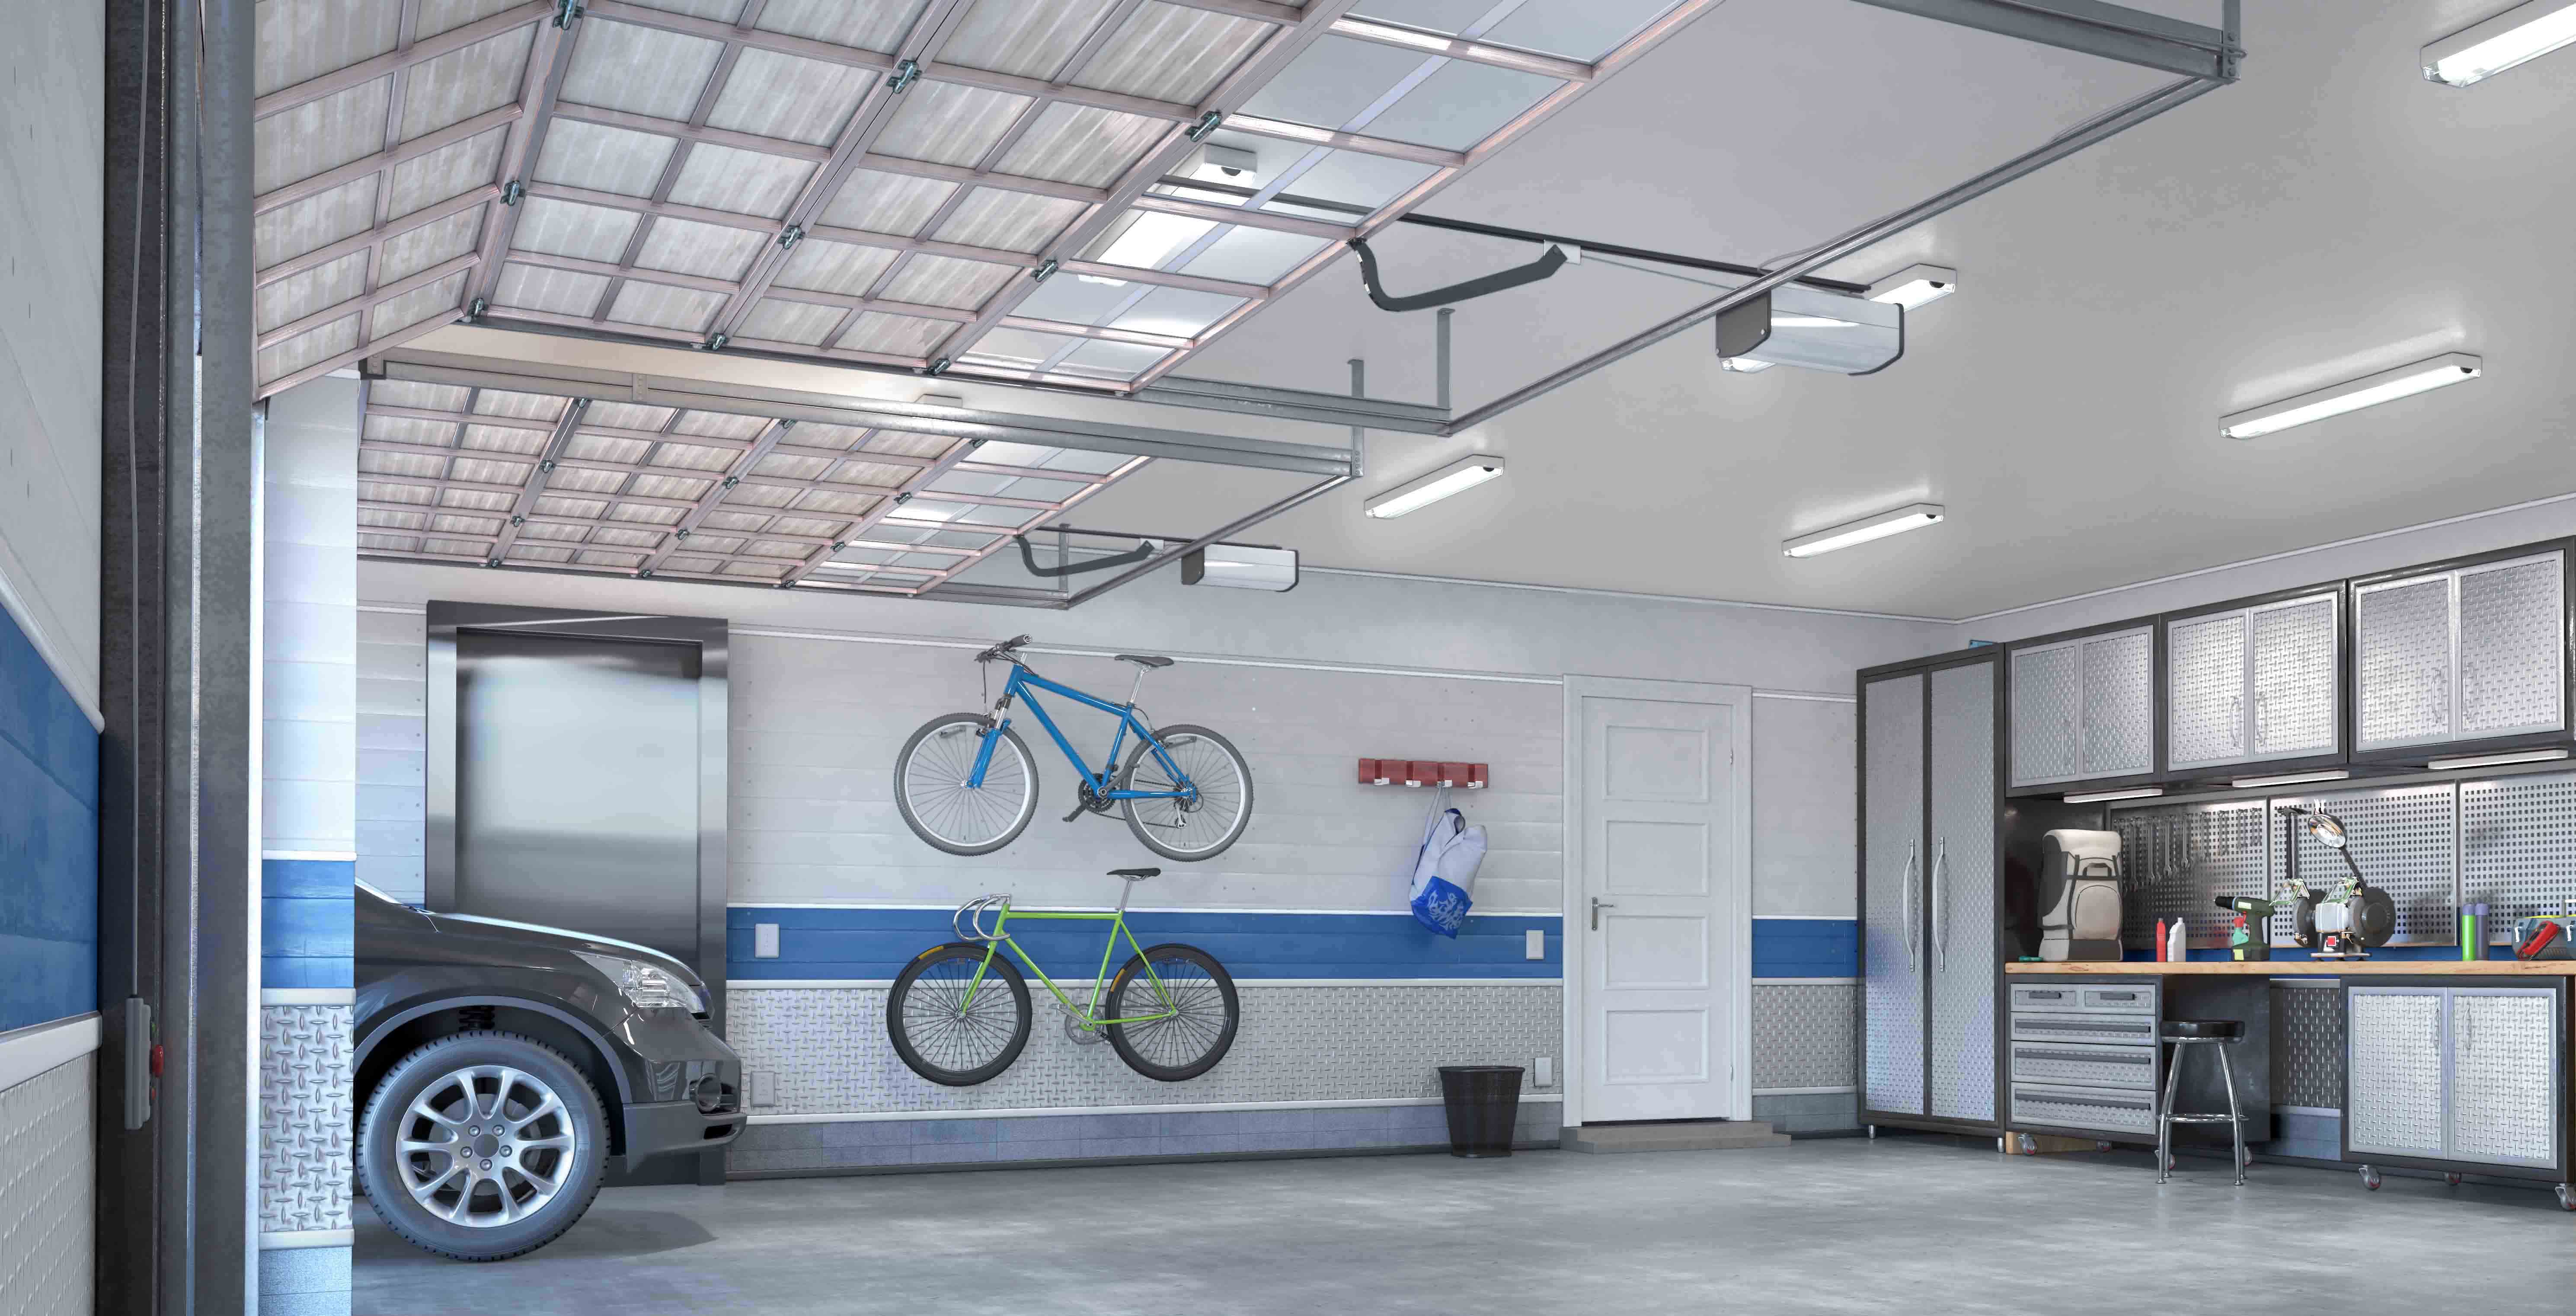 How To Choose The Best Garage Lighting For Your Home